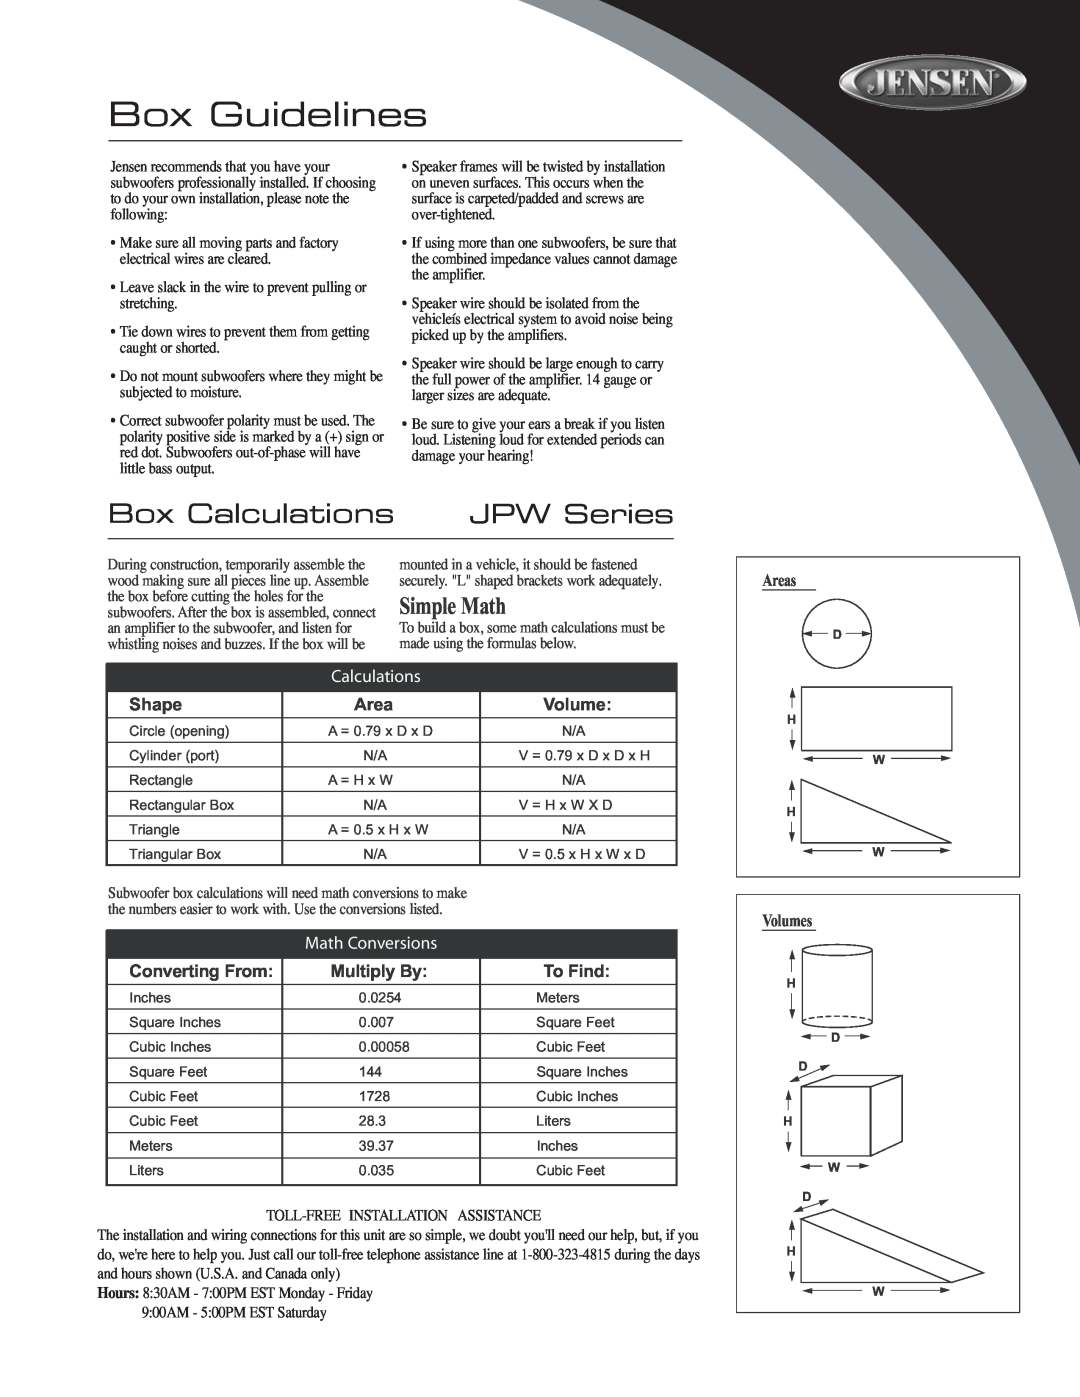 Jensen JPW412 Shape, Converting From, Multiply By, To Find, Areas, Volumes, Box Guidelines, Box Calculations 